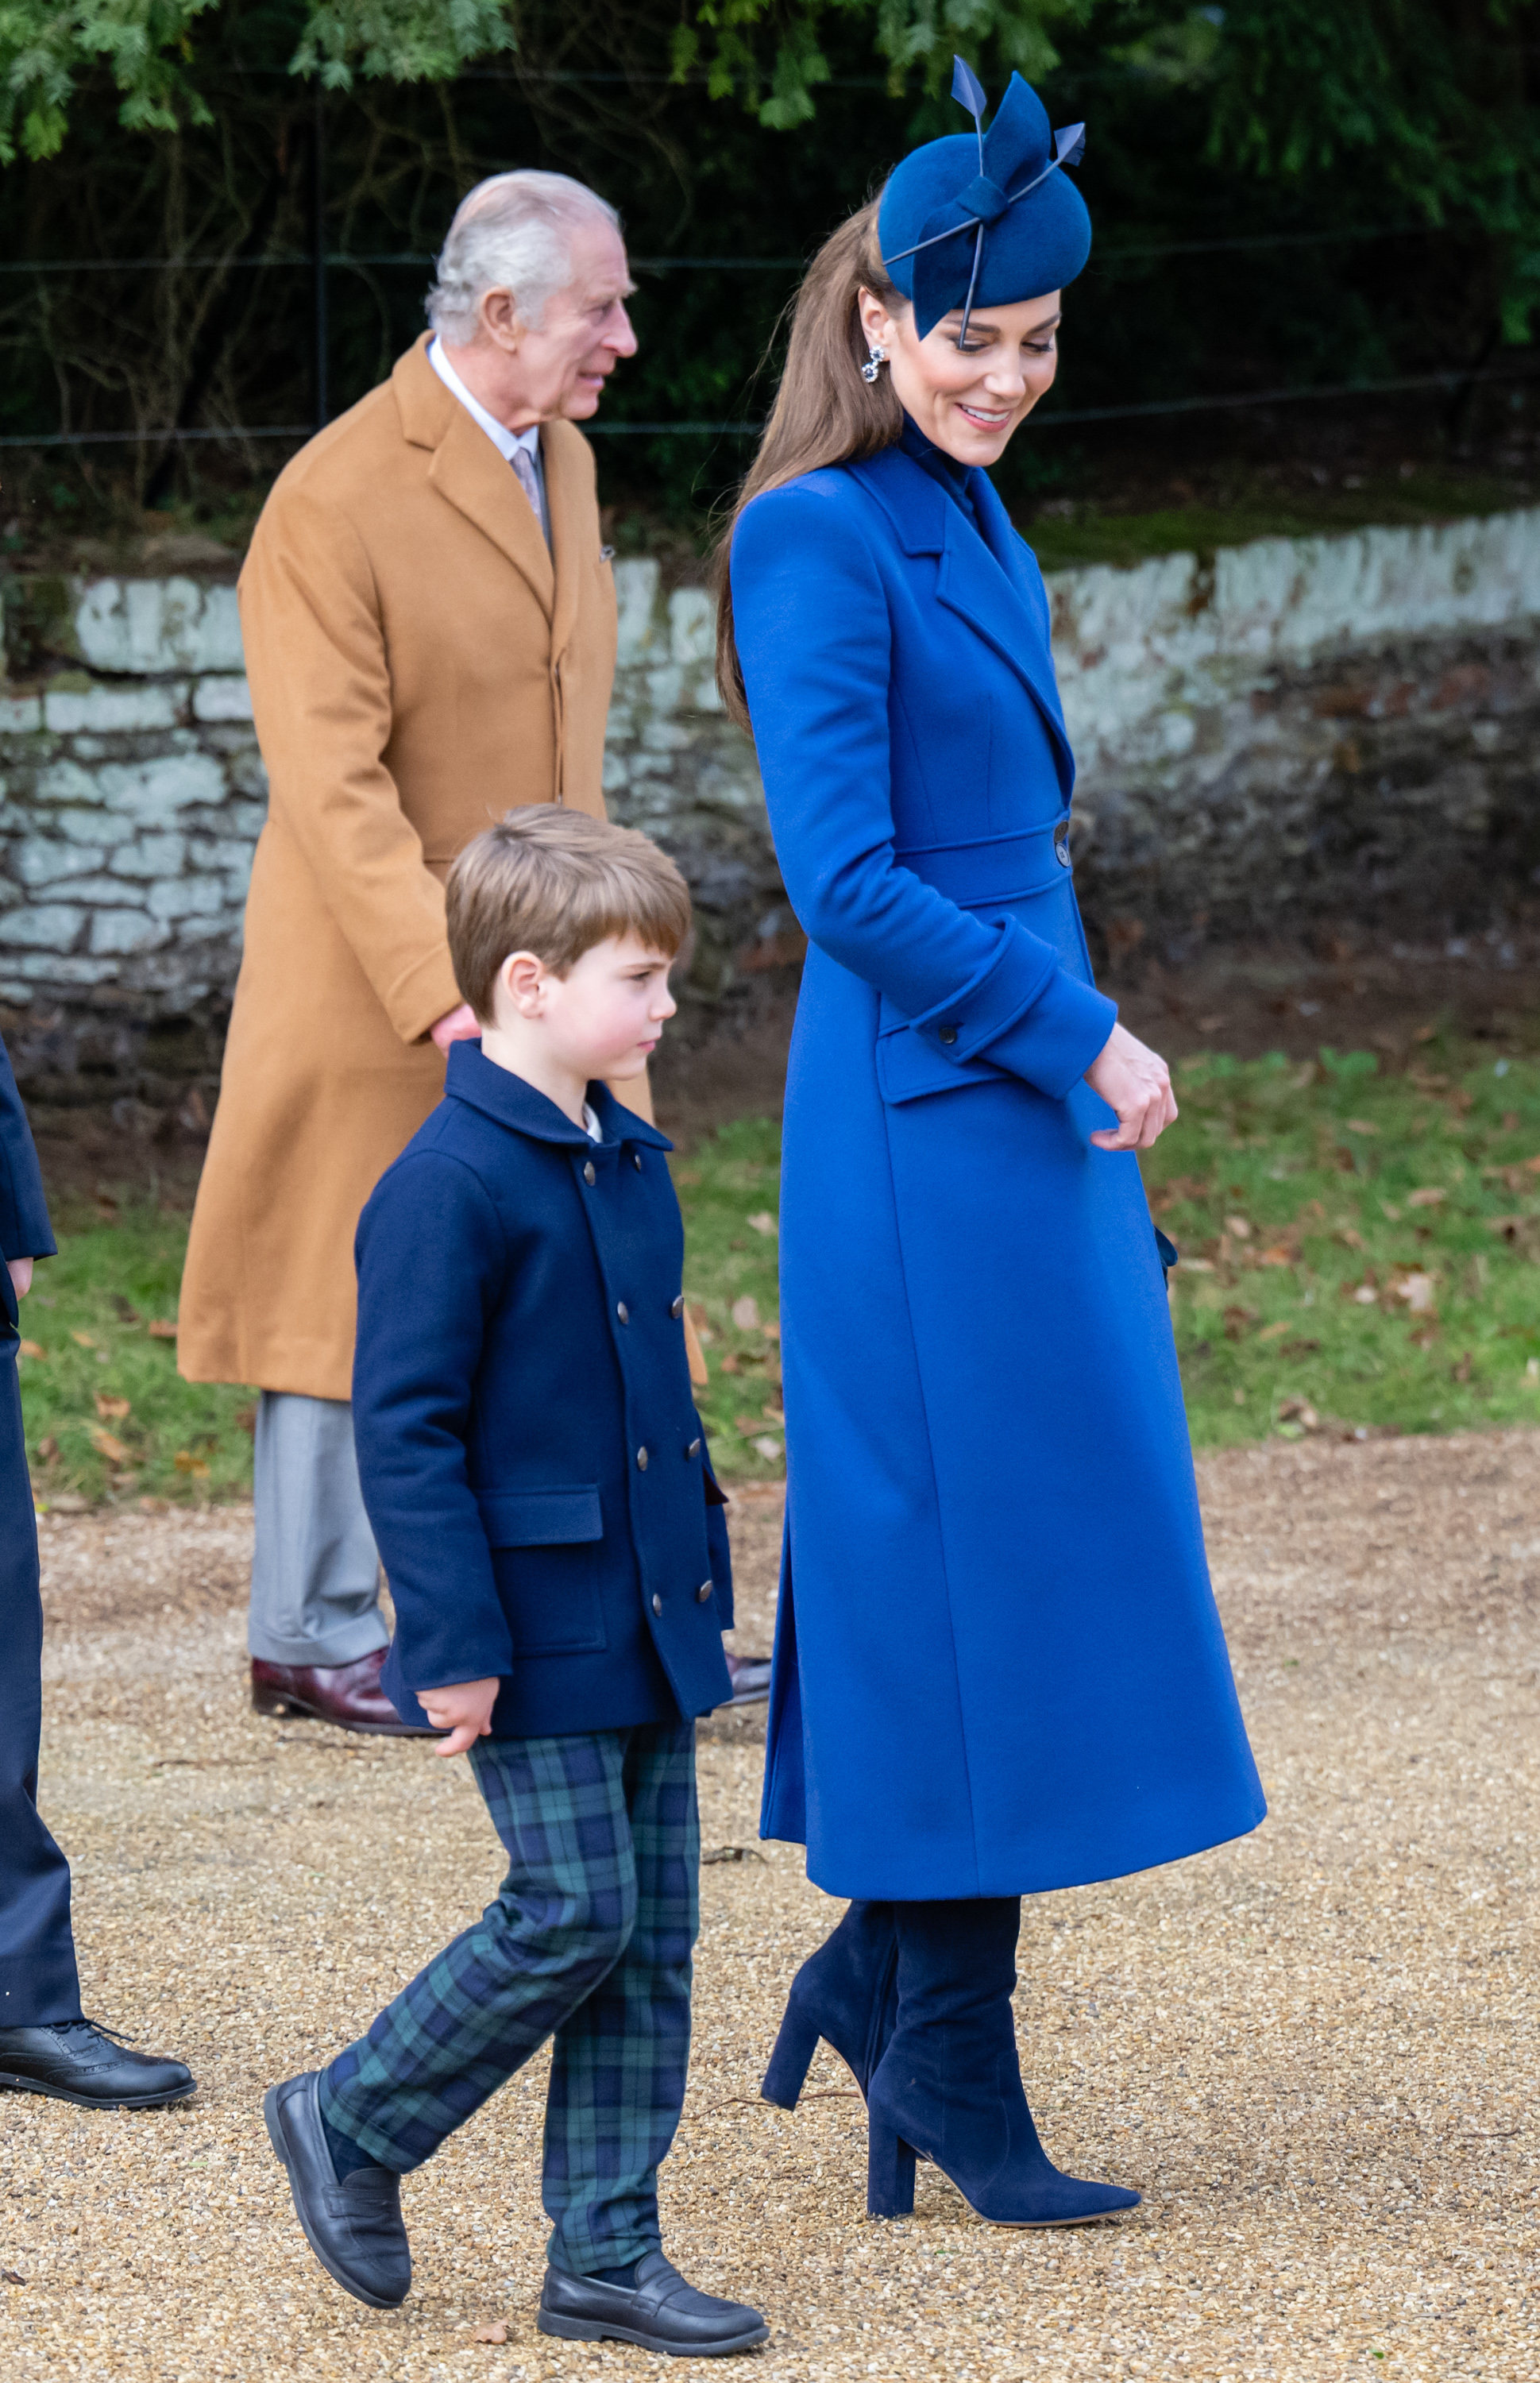 Kate Middleton in a long coat and fascinator, with King Charles III and Prince George at a formal event